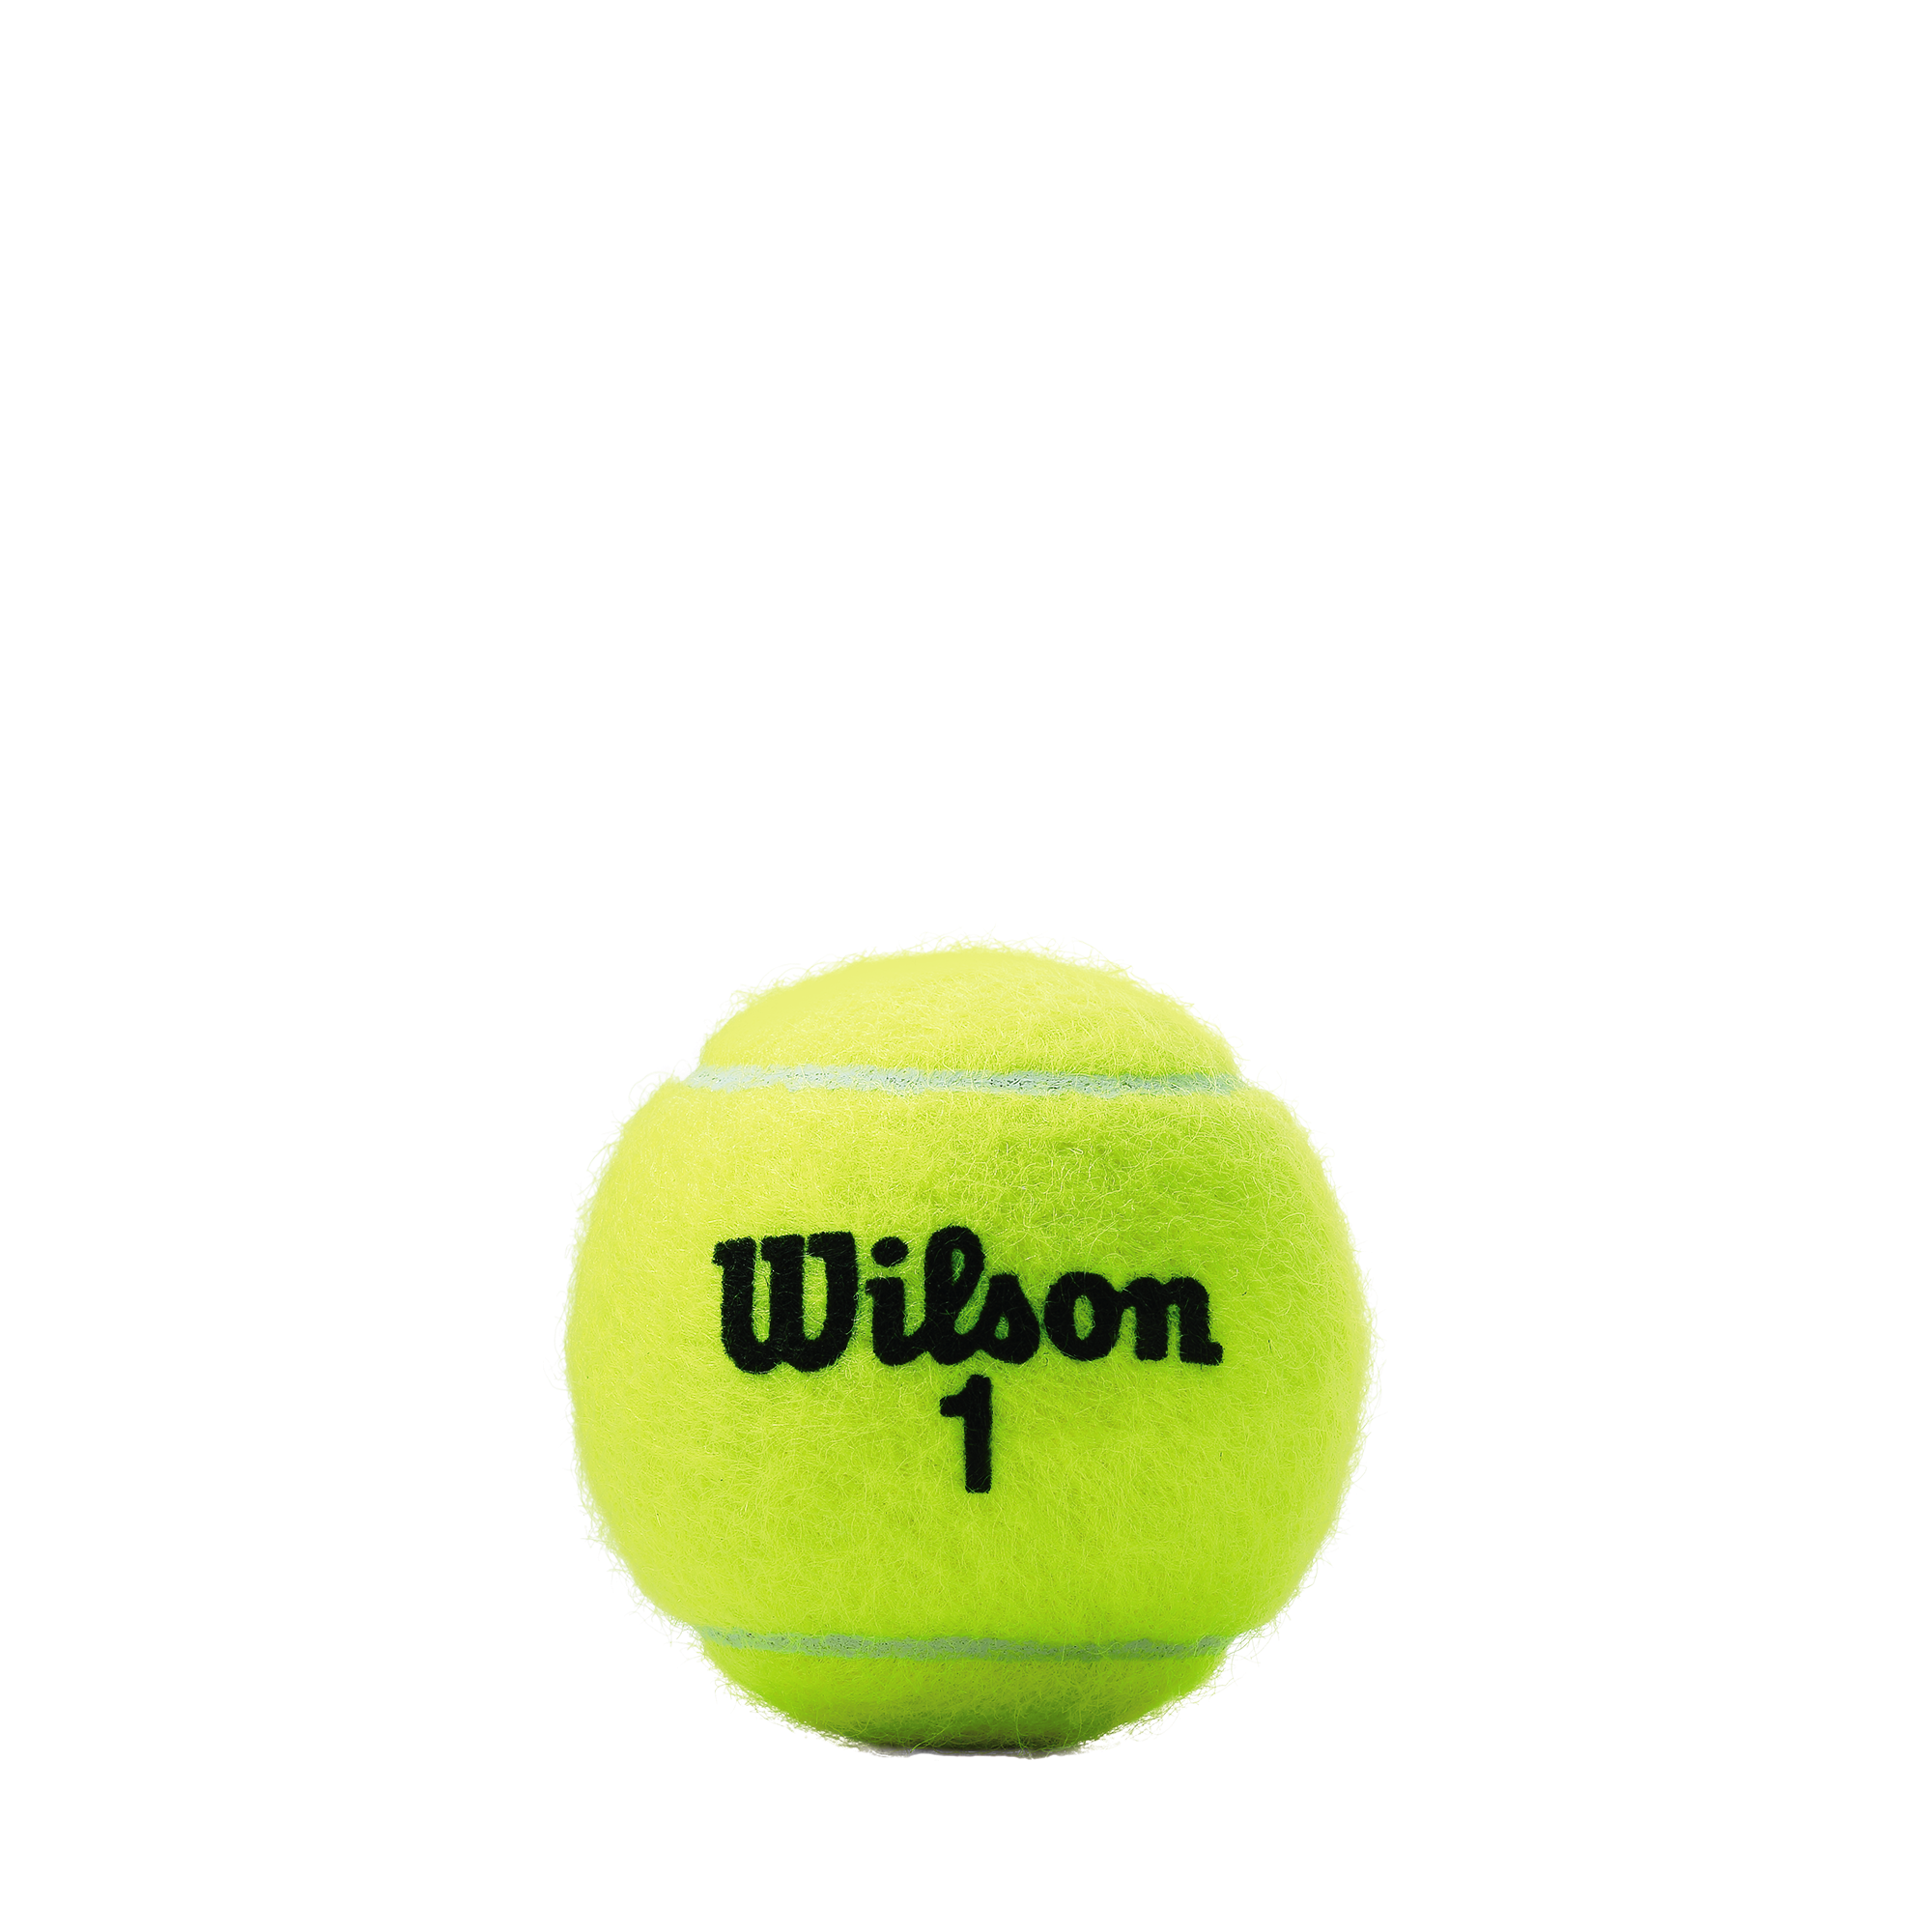 Wilson Championship Extra Duty - Case (24 Cans / 72 Balls)